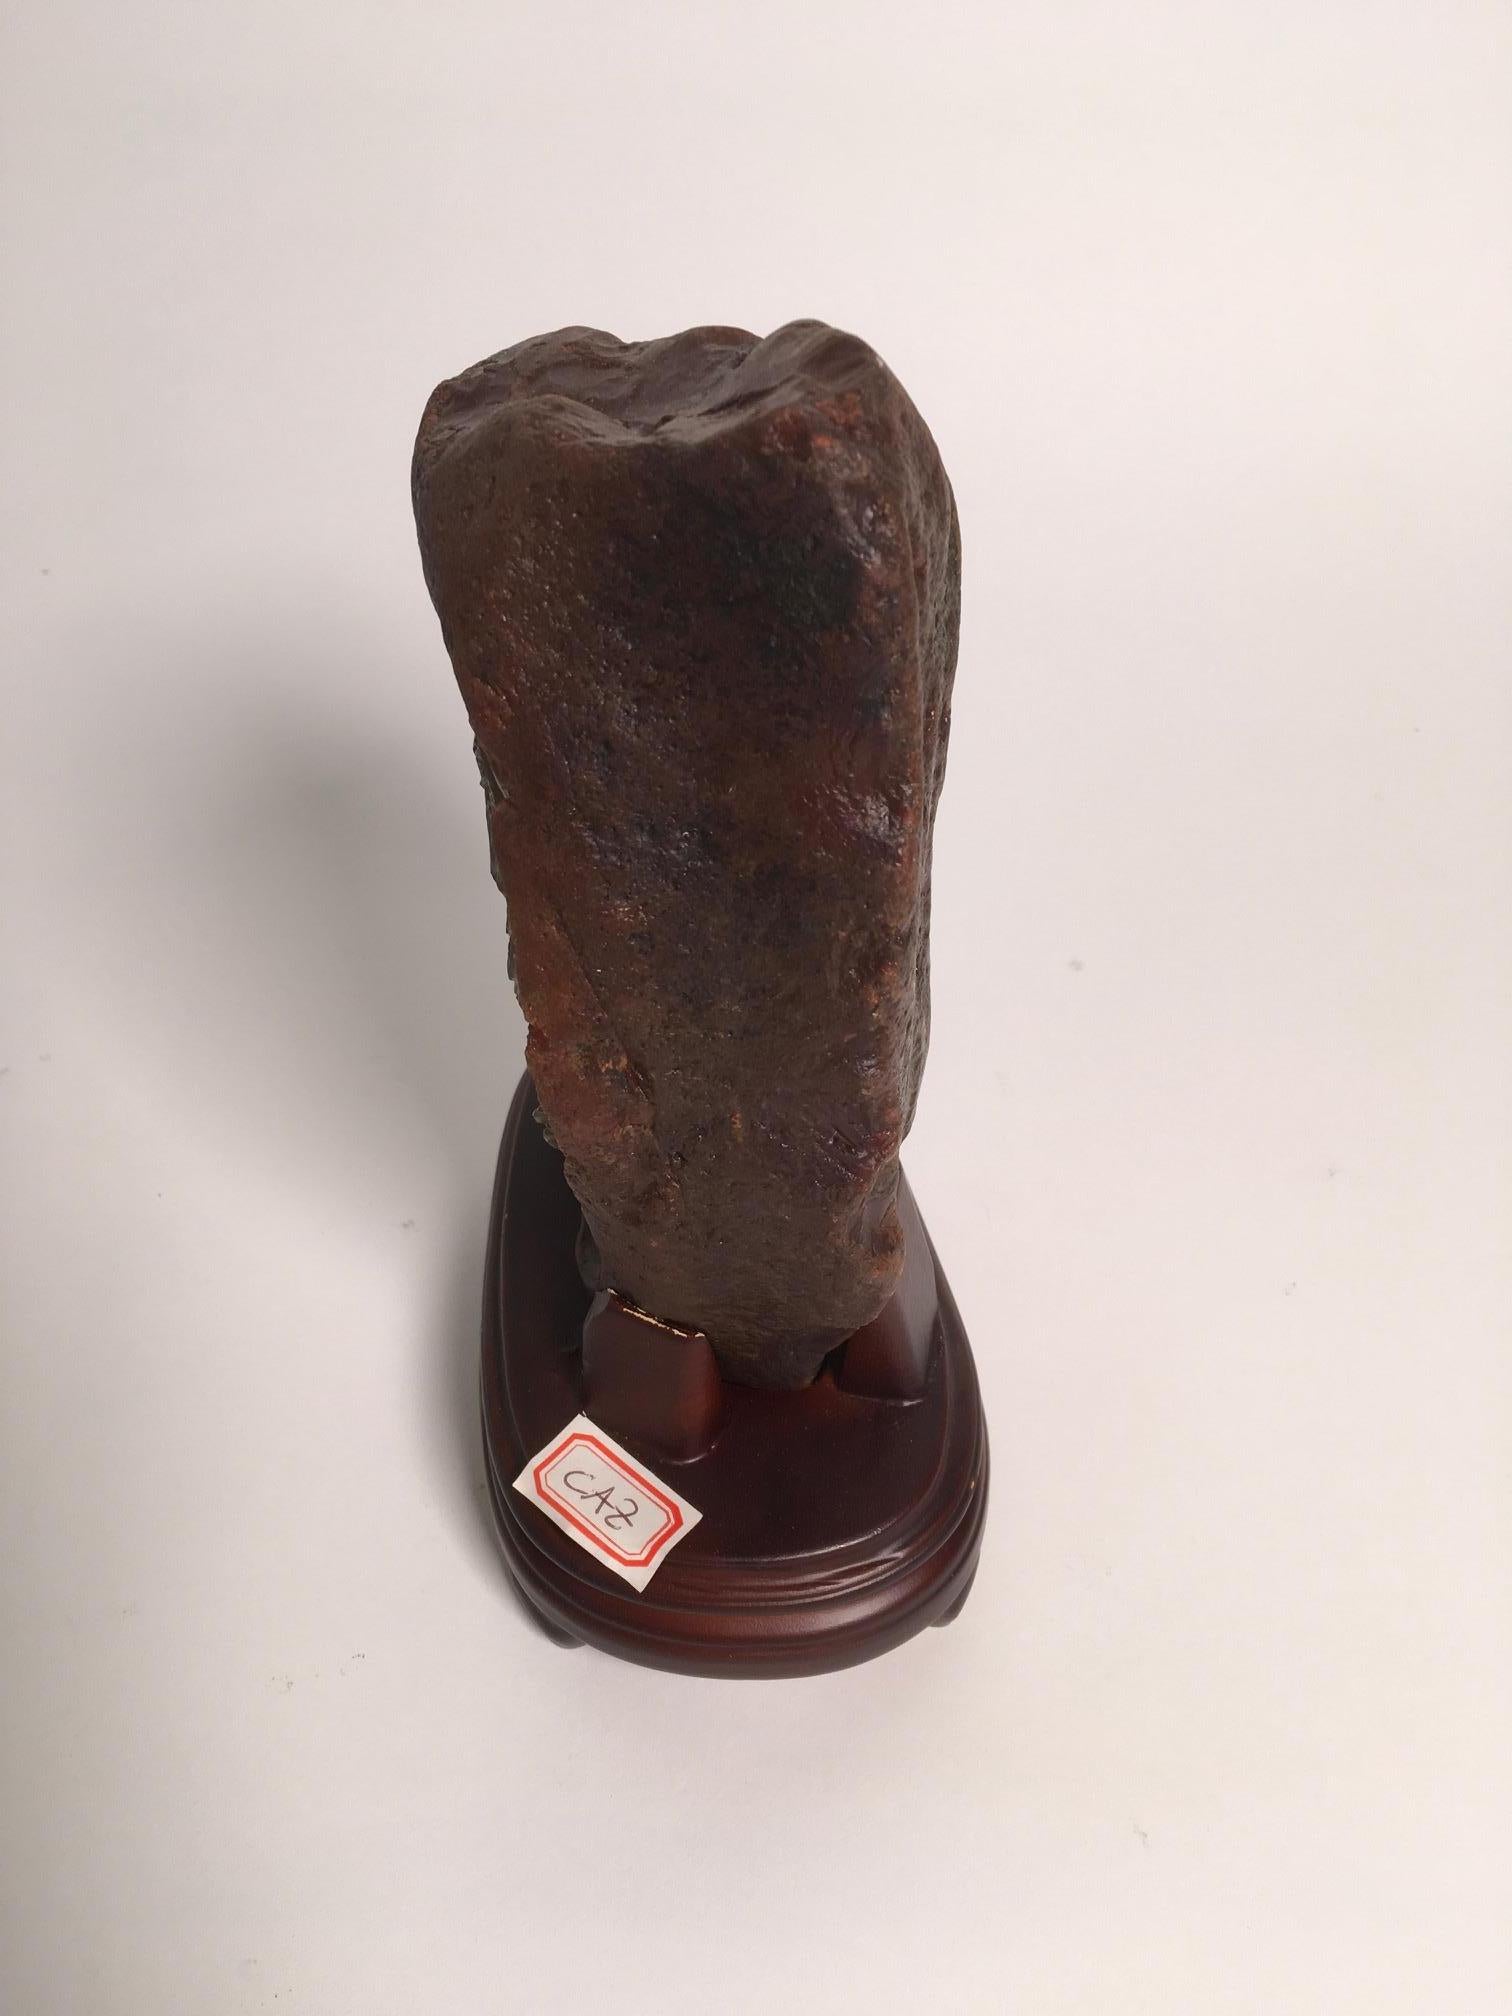 Chinese Beautiful Carved Agate Sculpture For Sale